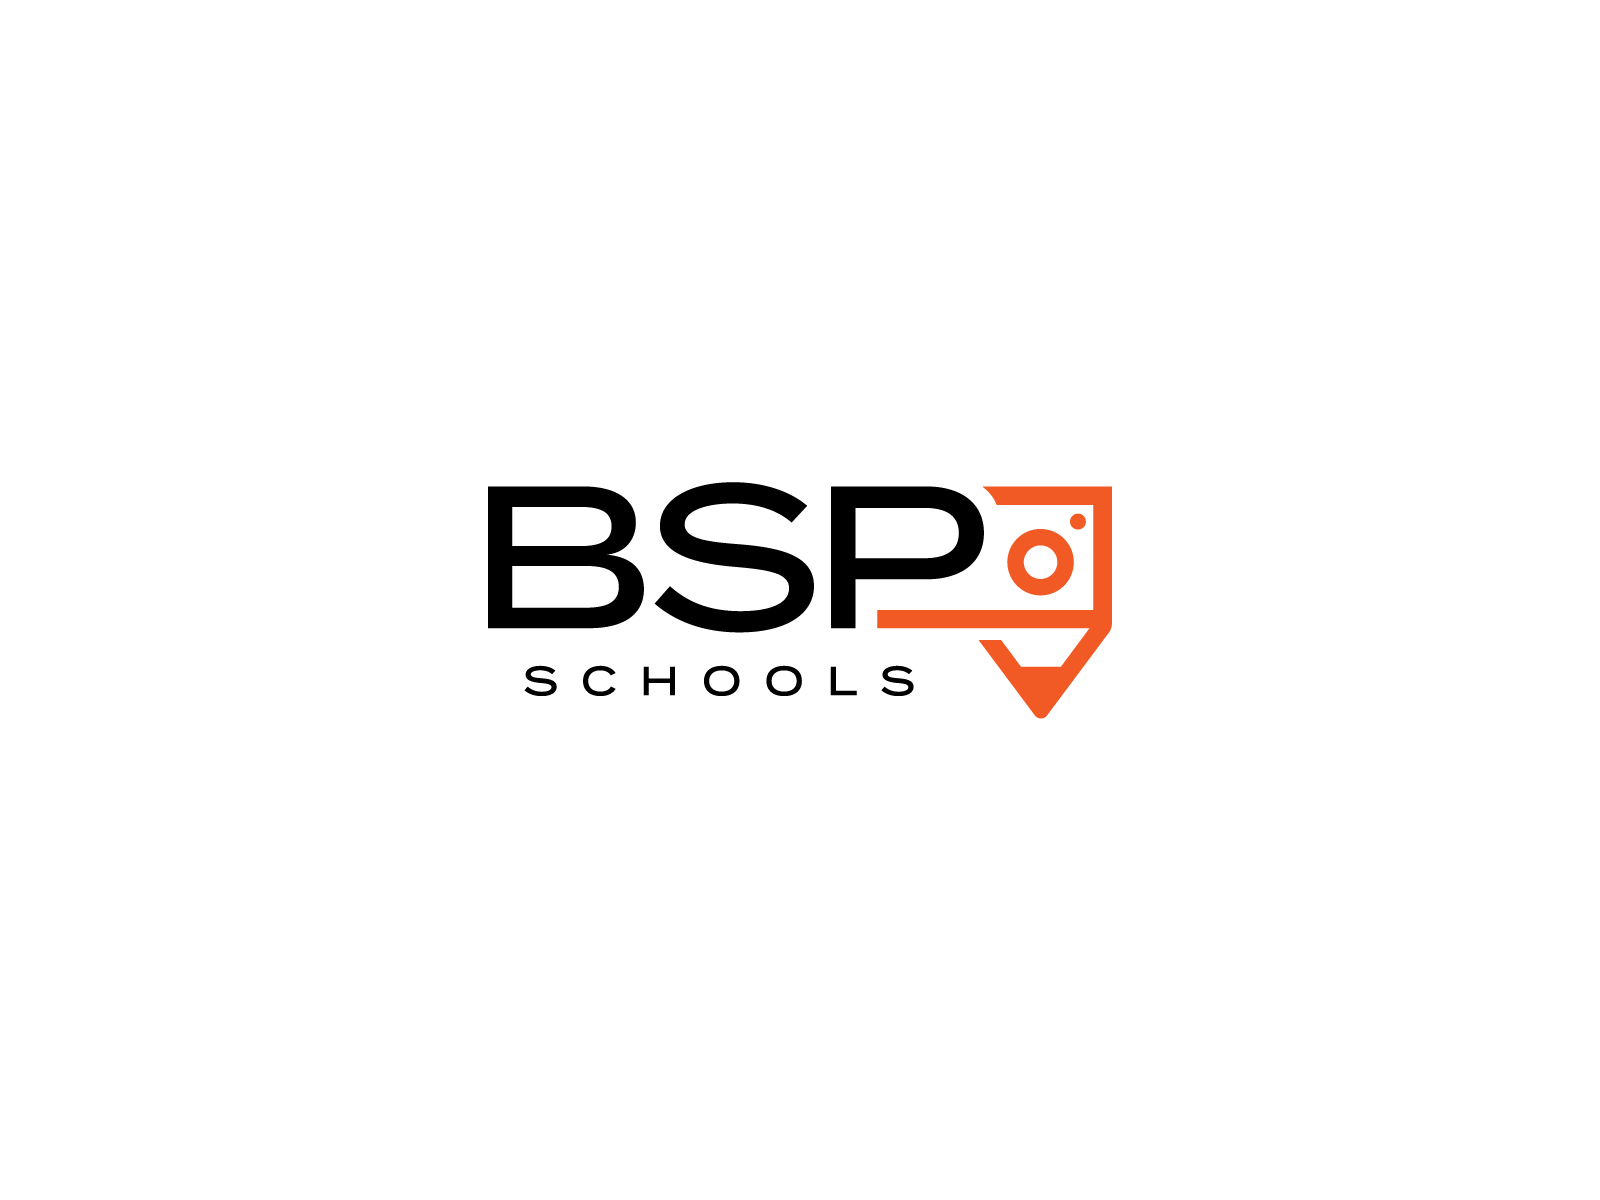 New logo wanted for bsp | Logo design contest | 99designs